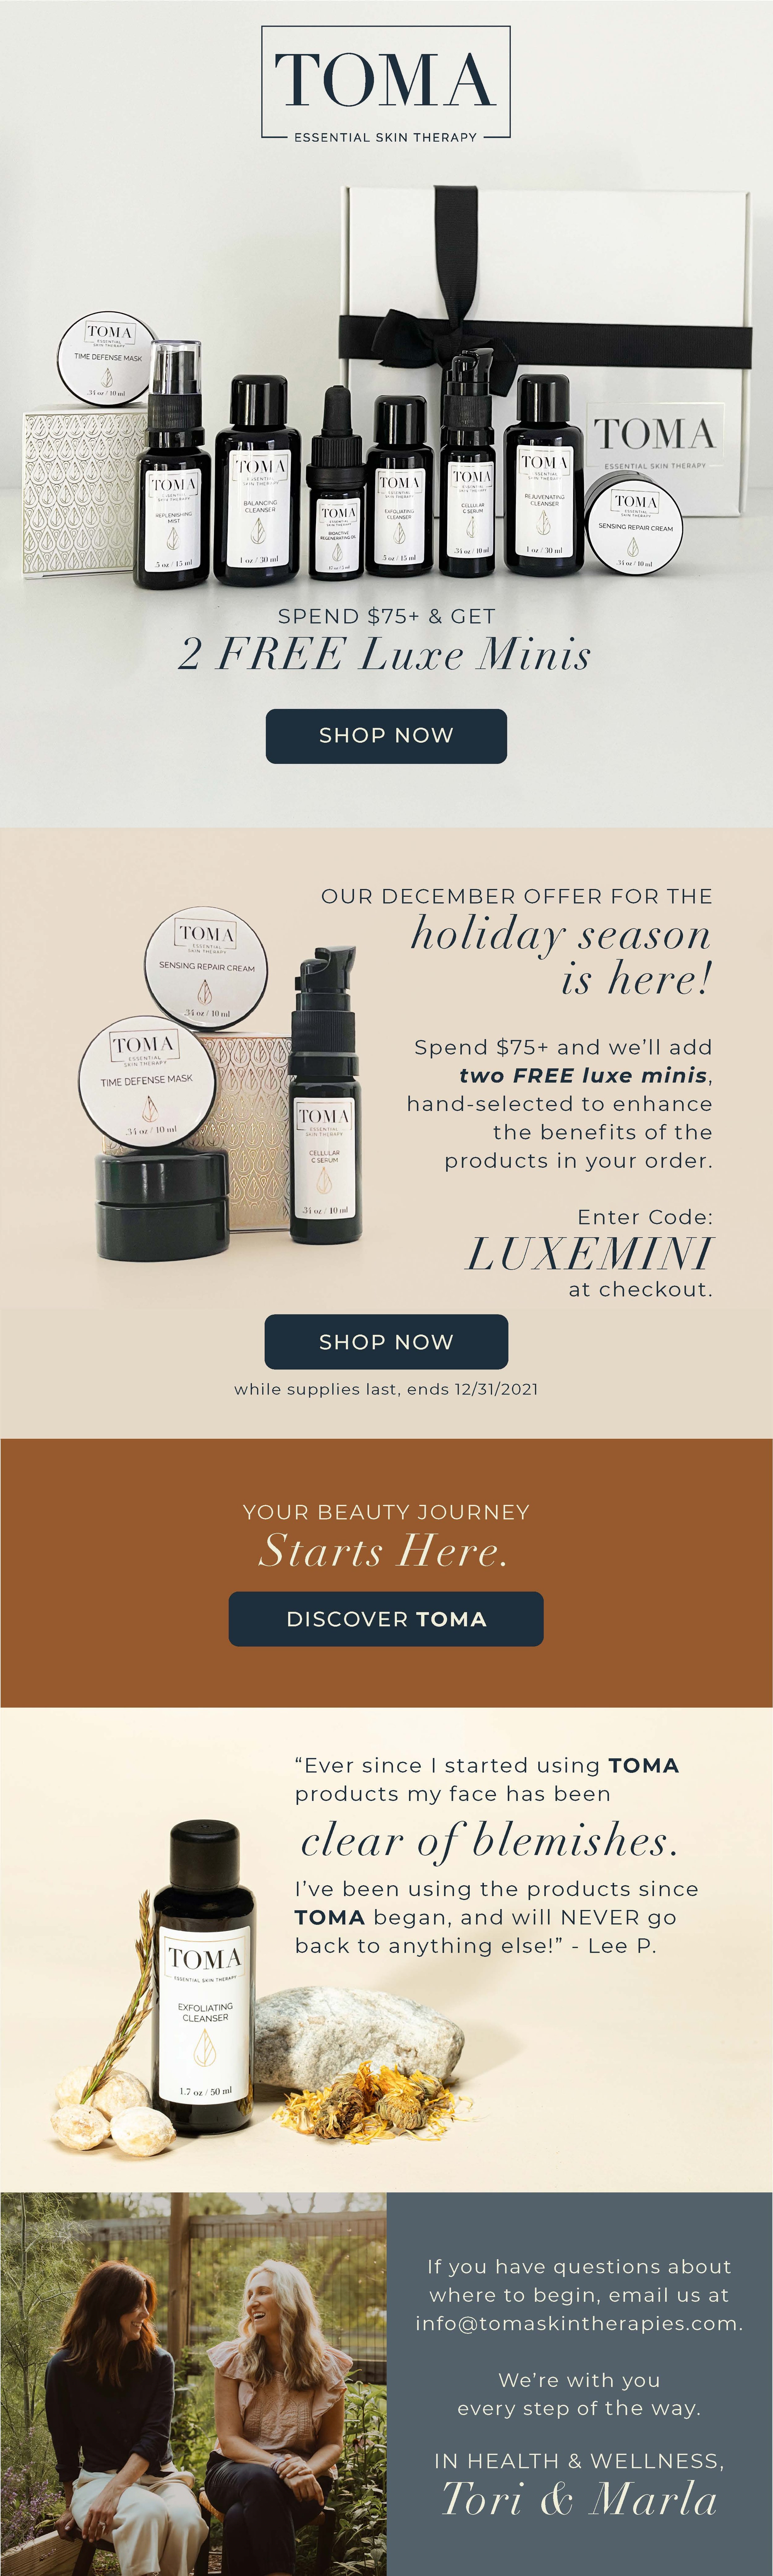 Toma Skin Therapies Email - Holiday 1 Deluxe Minis.jpg